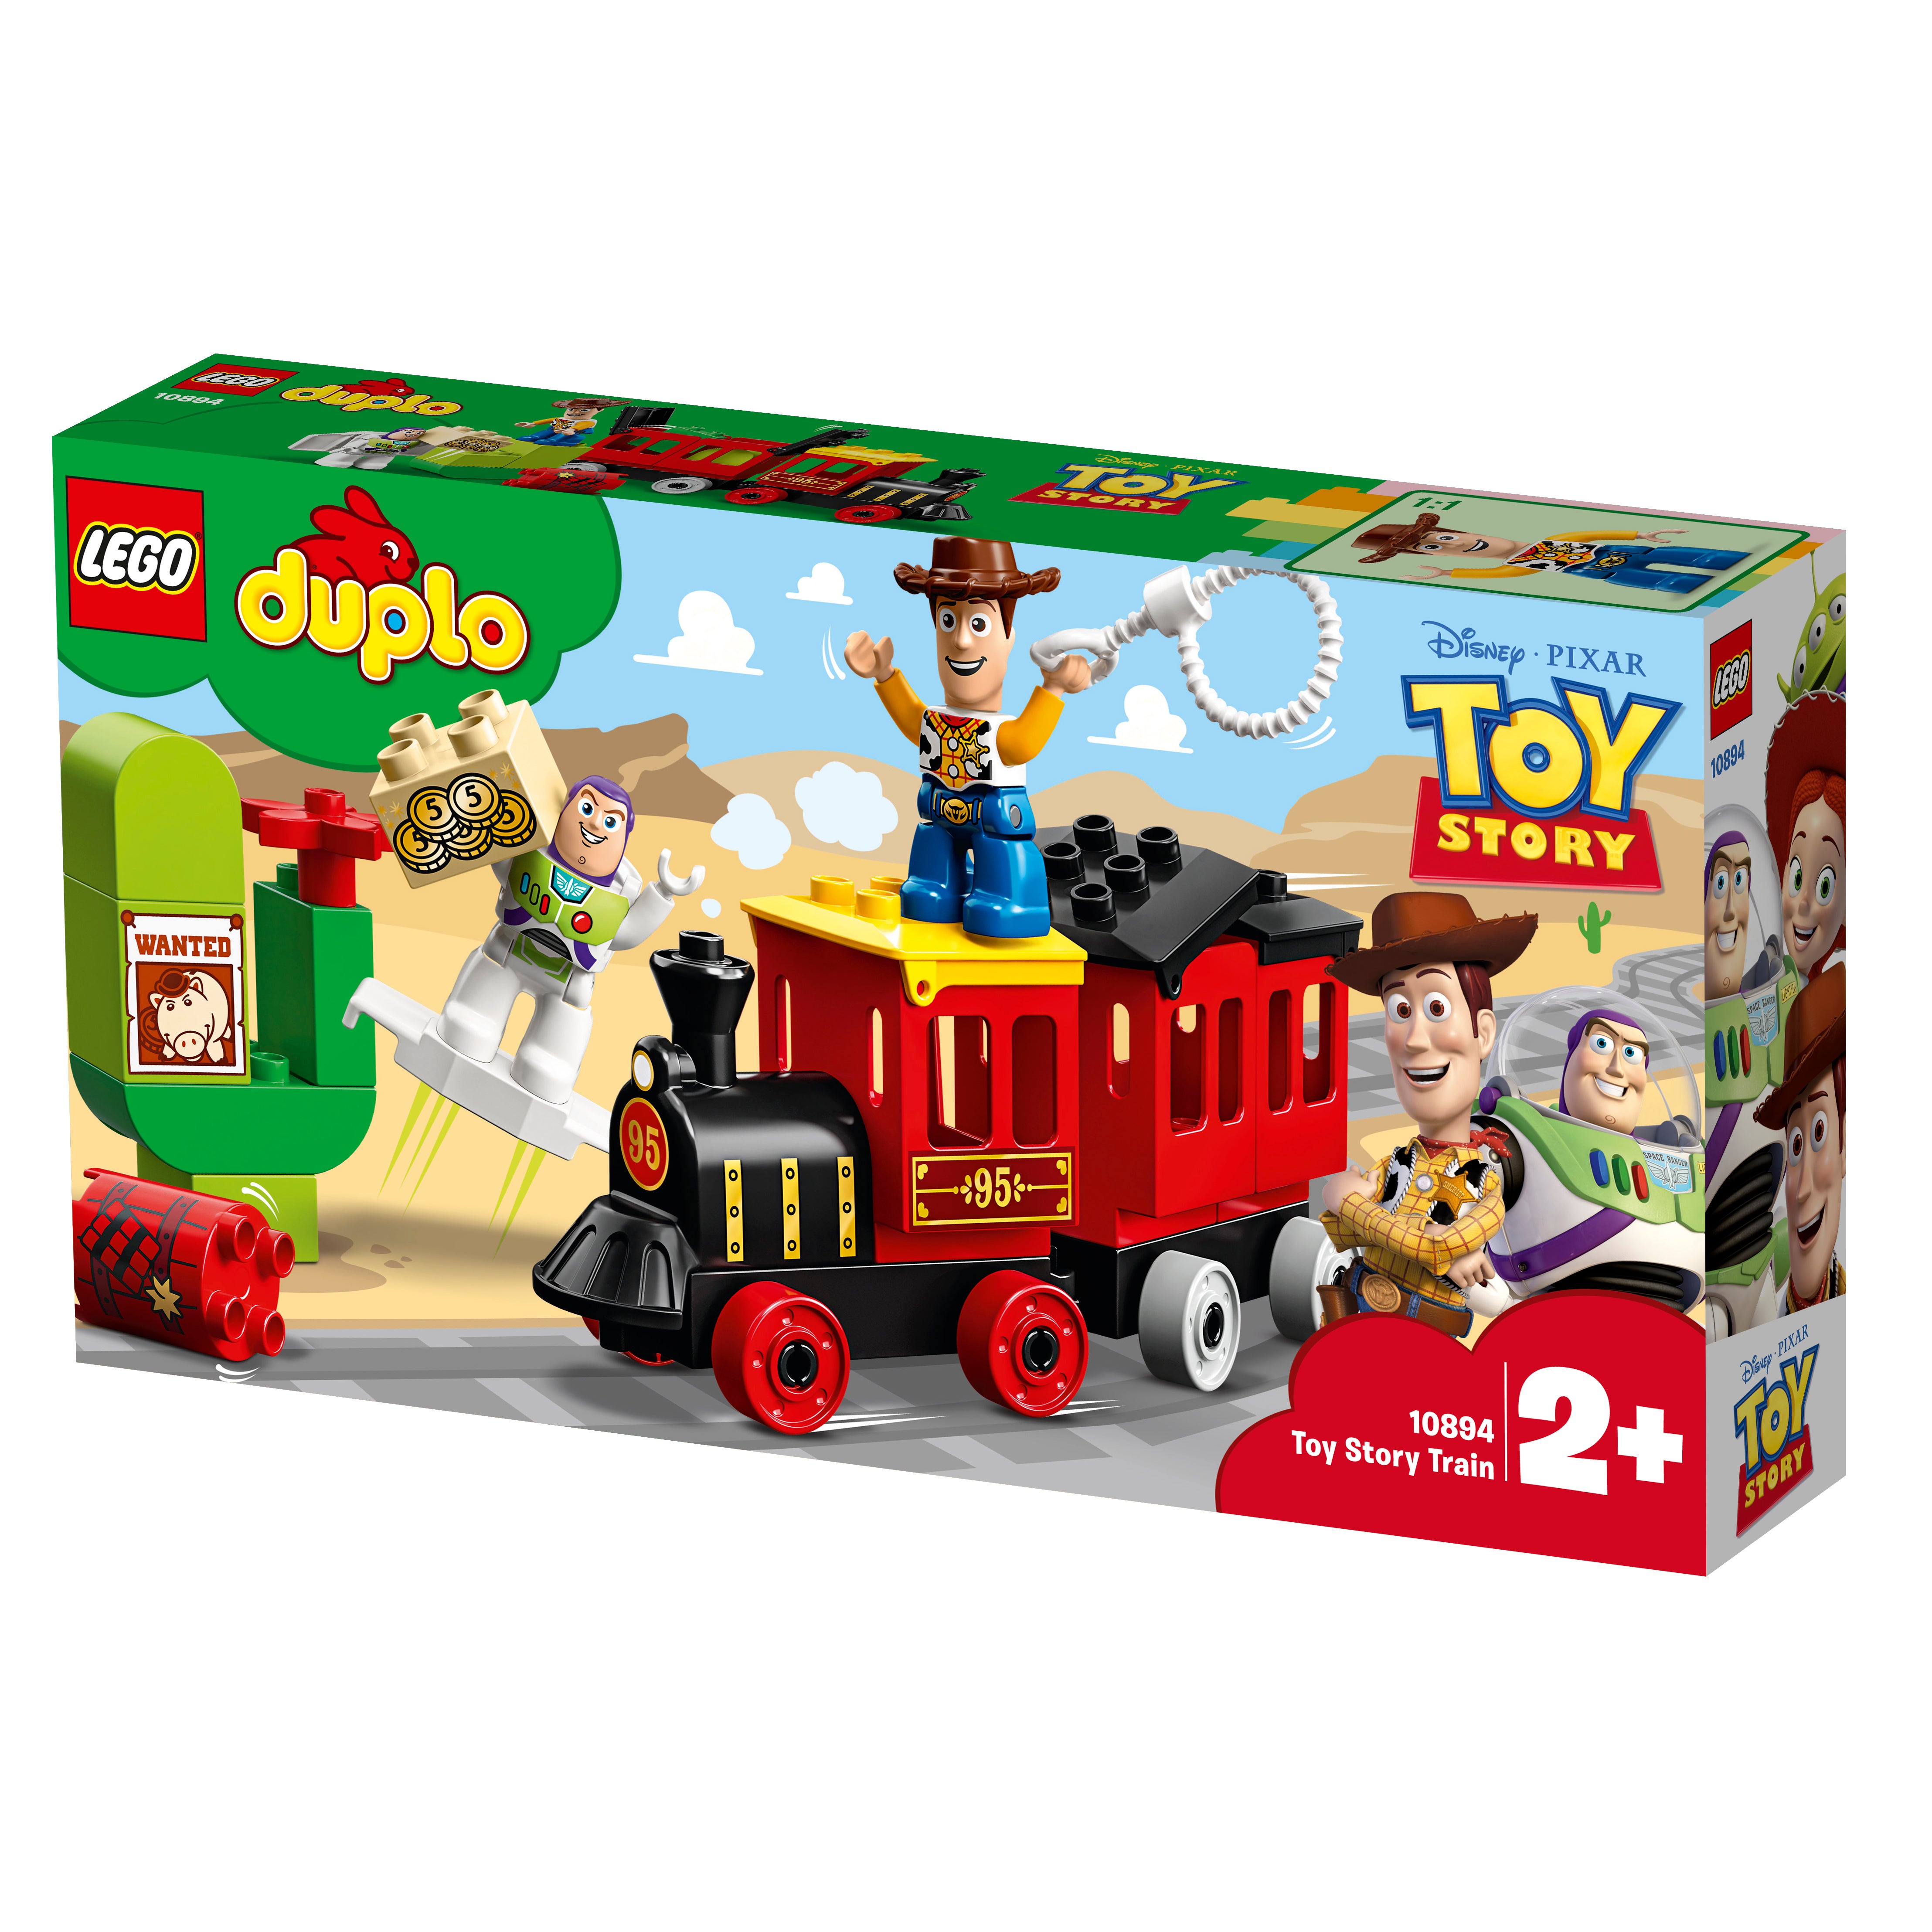 duplo toy story 2019